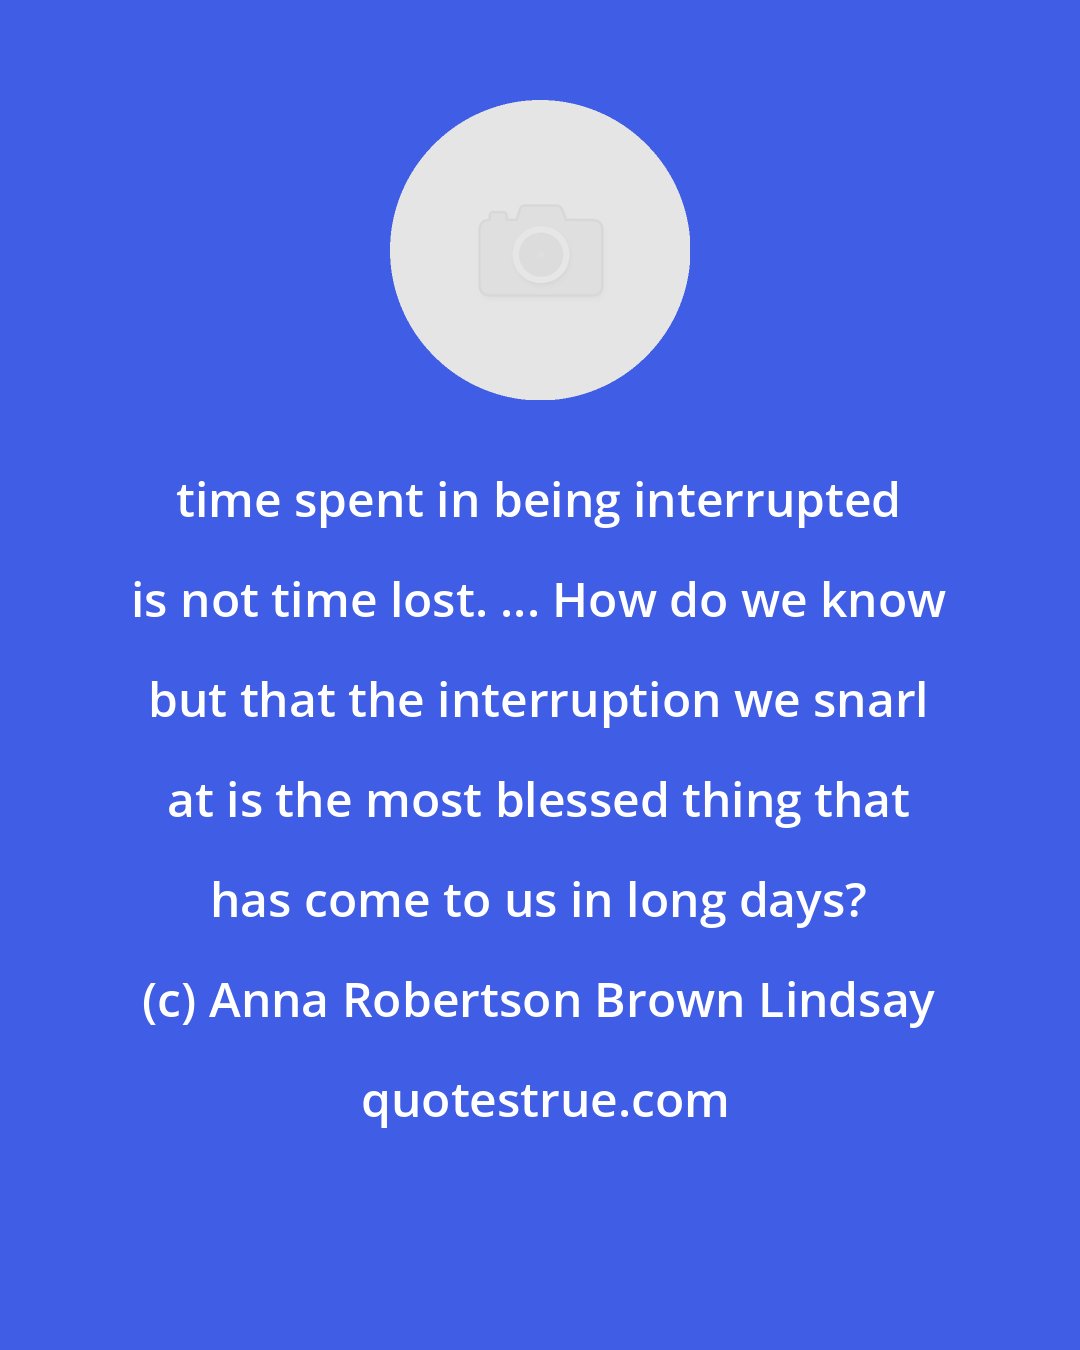 Anna Robertson Brown Lindsay: time spent in being interrupted is not time lost. ... How do we know but that the interruption we snarl at is the most blessed thing that has come to us in long days?